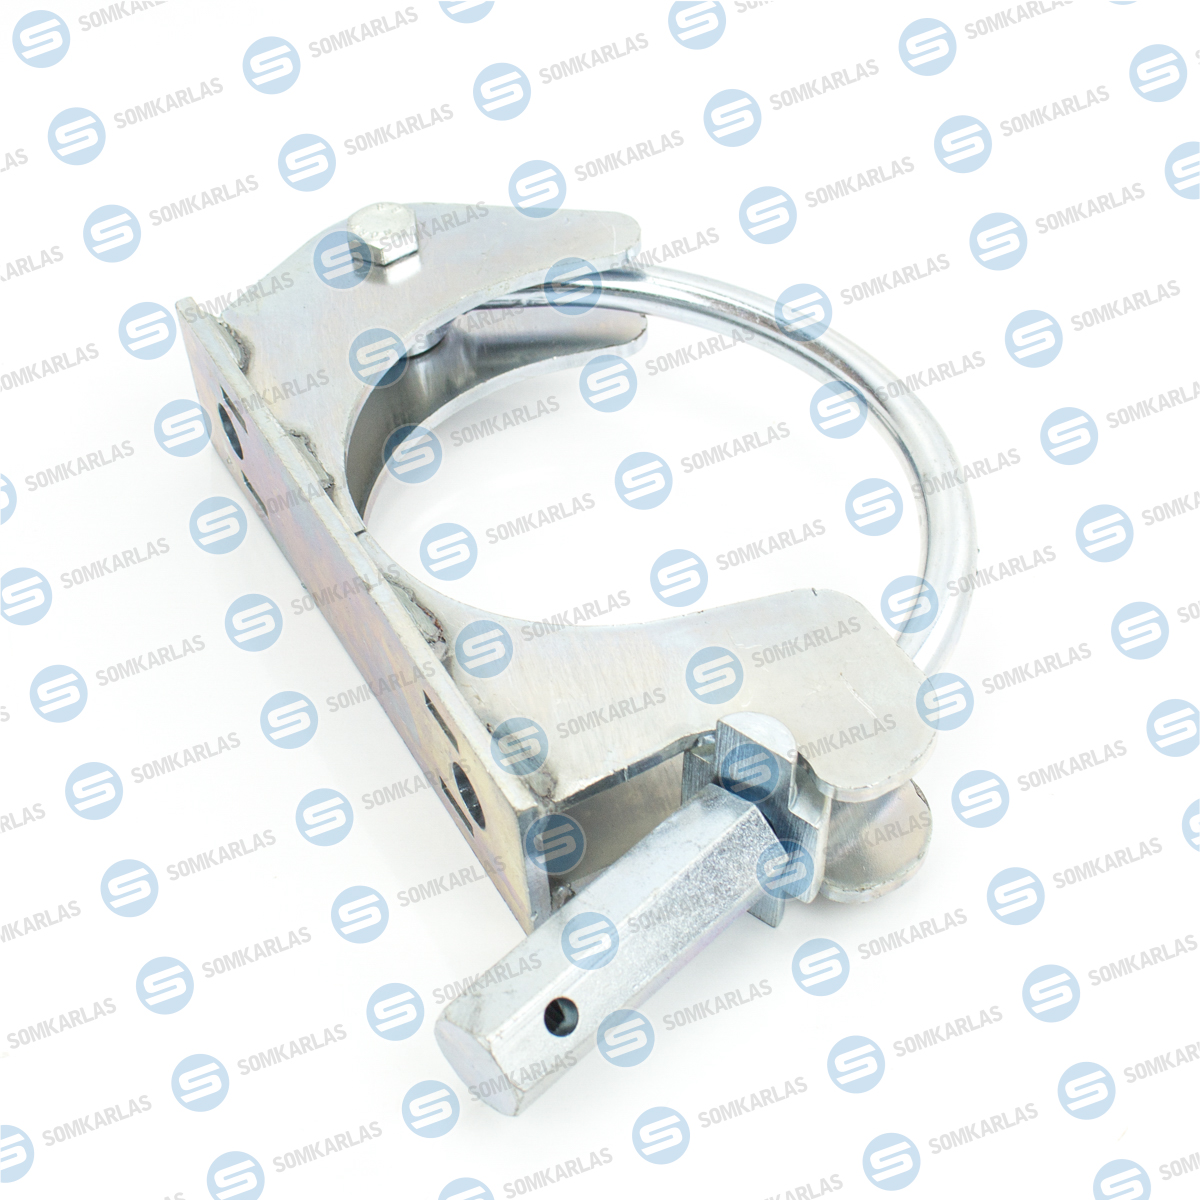 SOM40109 - PIPE CONNECTION COUPLING - 